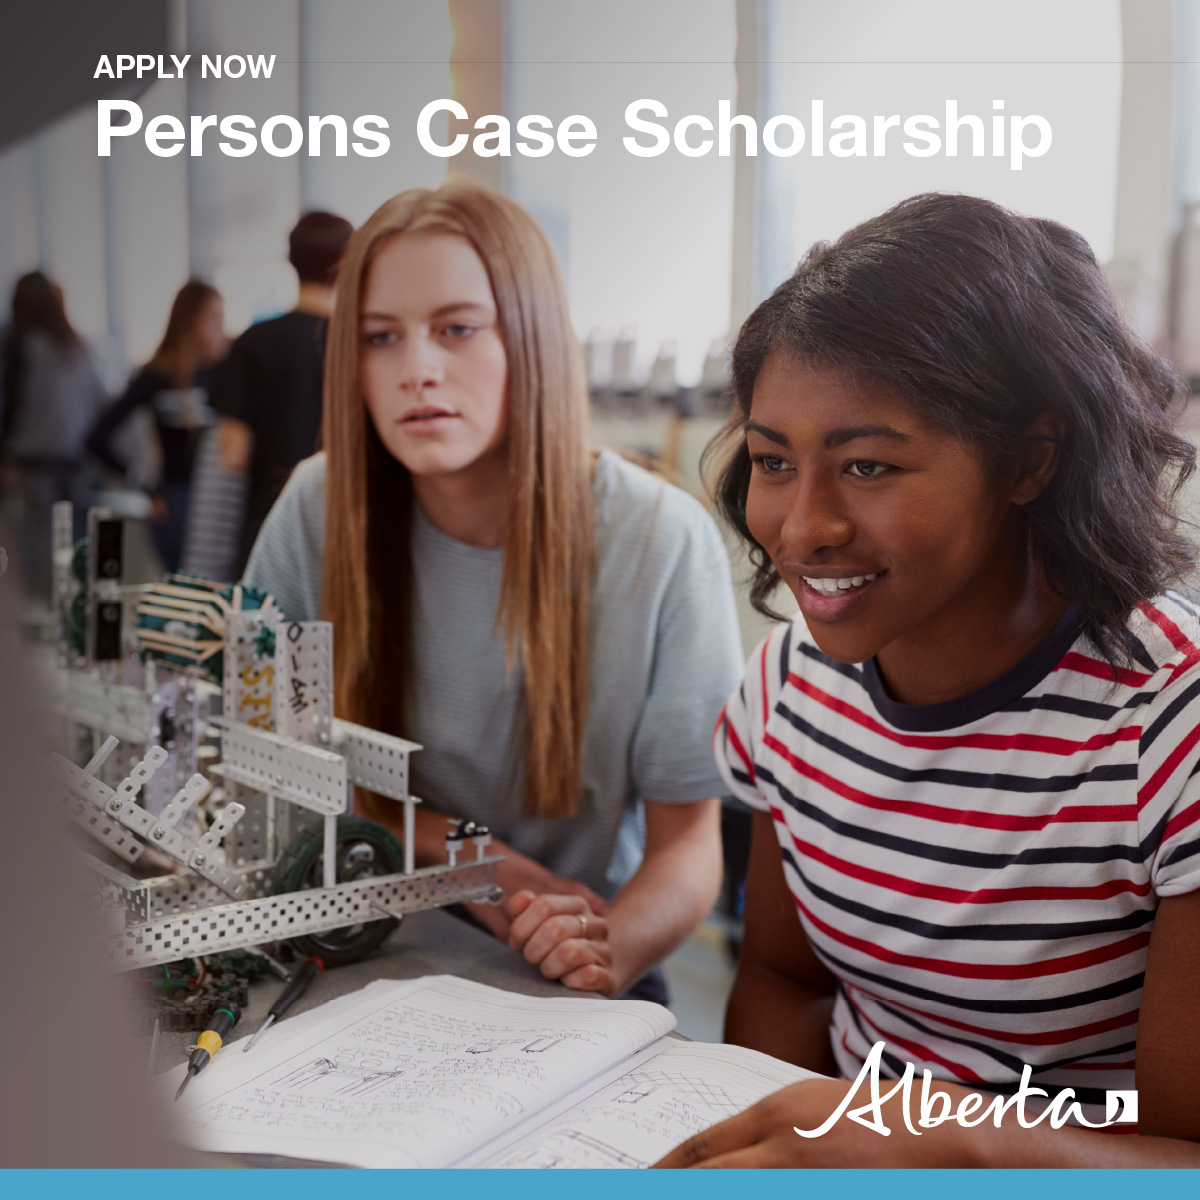 Albertans studying arts, humanities and social sciences that work to close gender gaps, or in areas where their gender is under-represented, can now apply for the Persons Case Scholarship. Applicants of all genders are eligible to apply by Dec. 8: alberta.ca/release.cfm?xI…